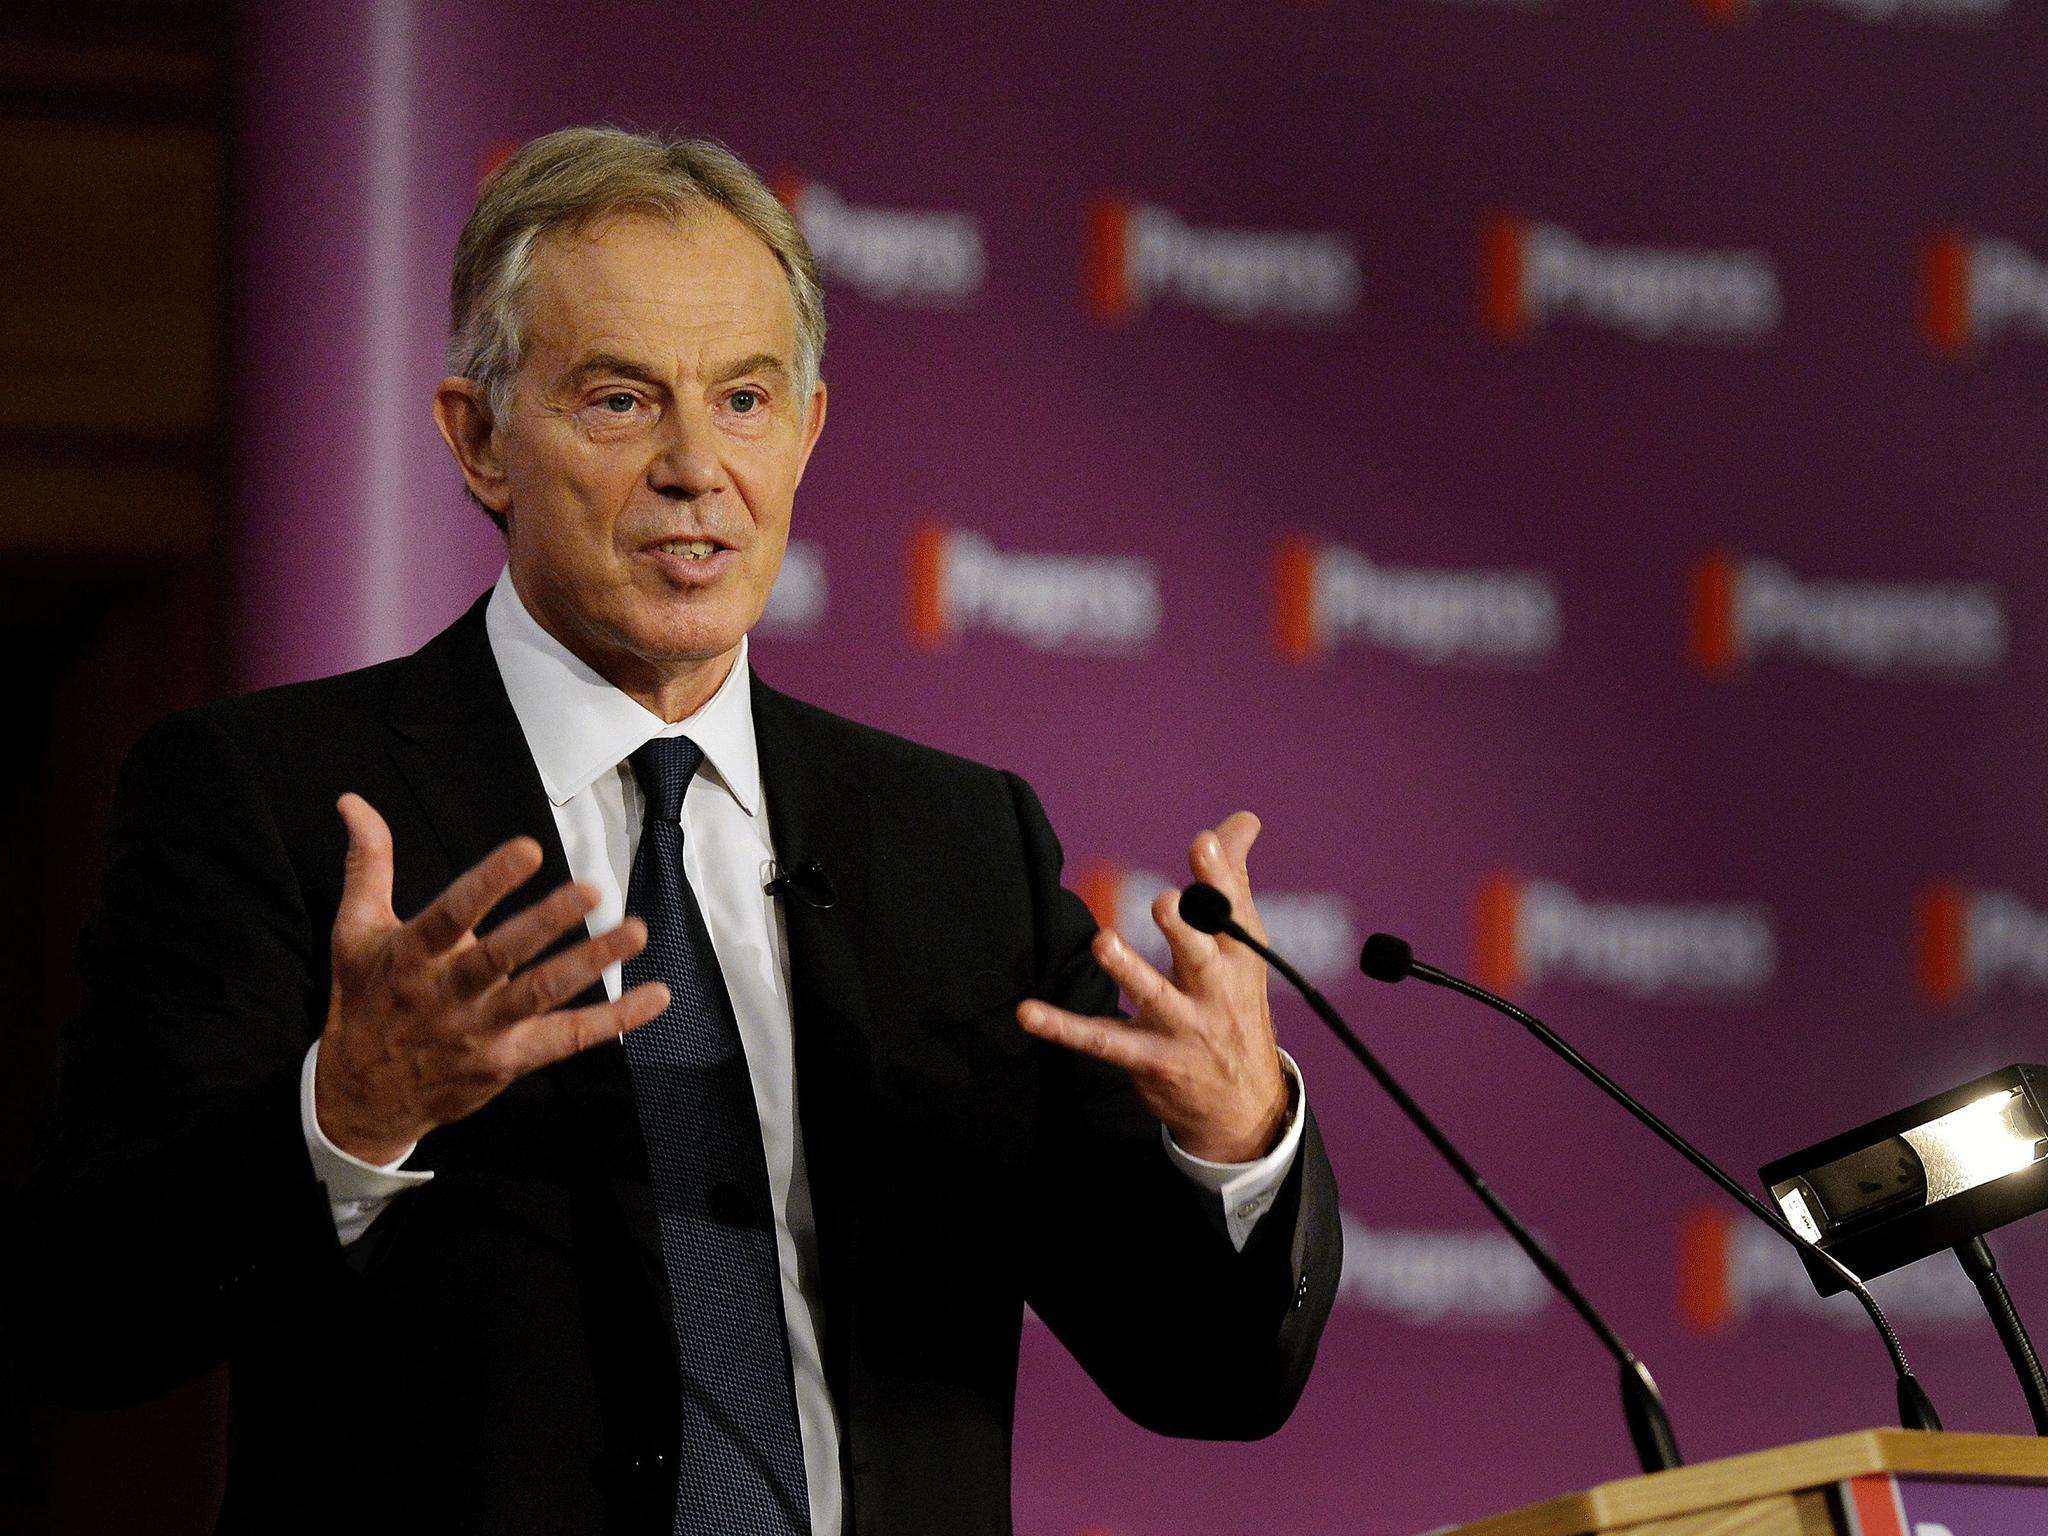 Tony Blair is to take on a new role combating anti-Semitism after announcing he is stepping down as the Quartet's Middle East envoy